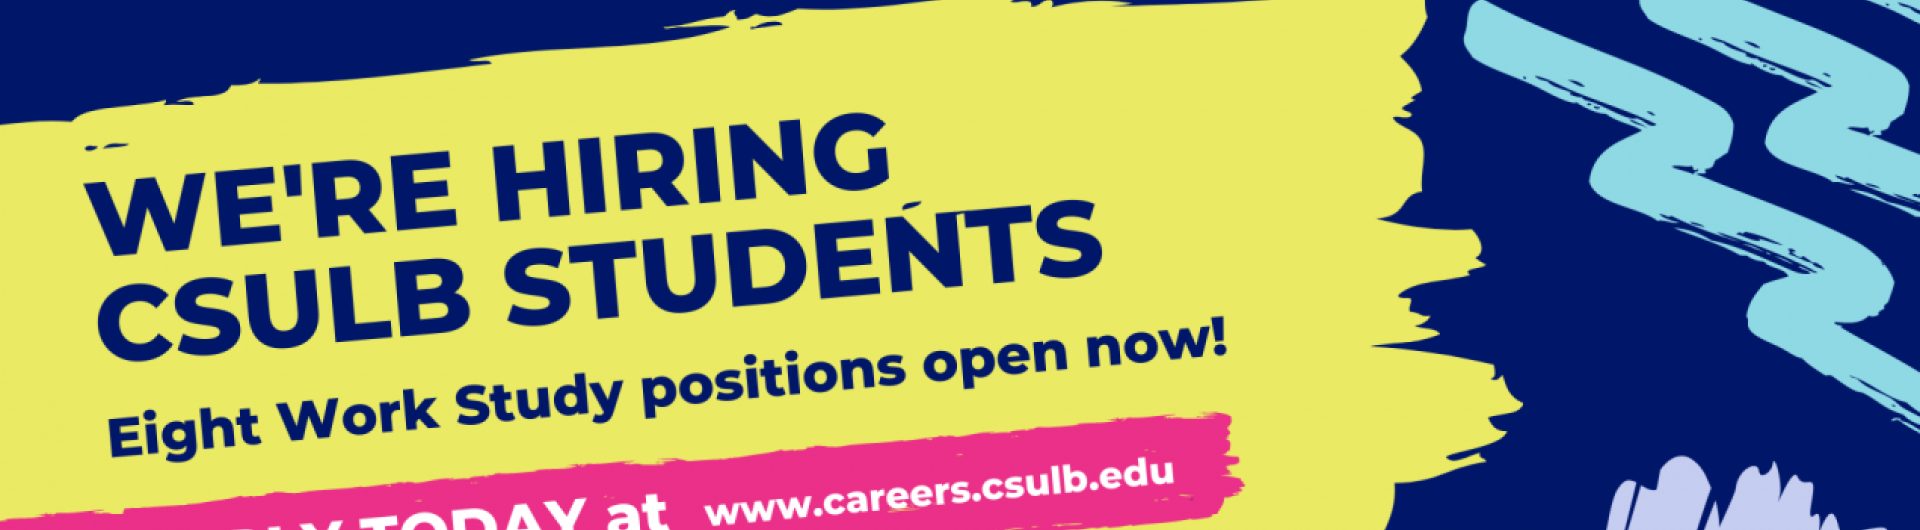 Kleefeld Contemporary is hiring CSULB federal work study students - apply today